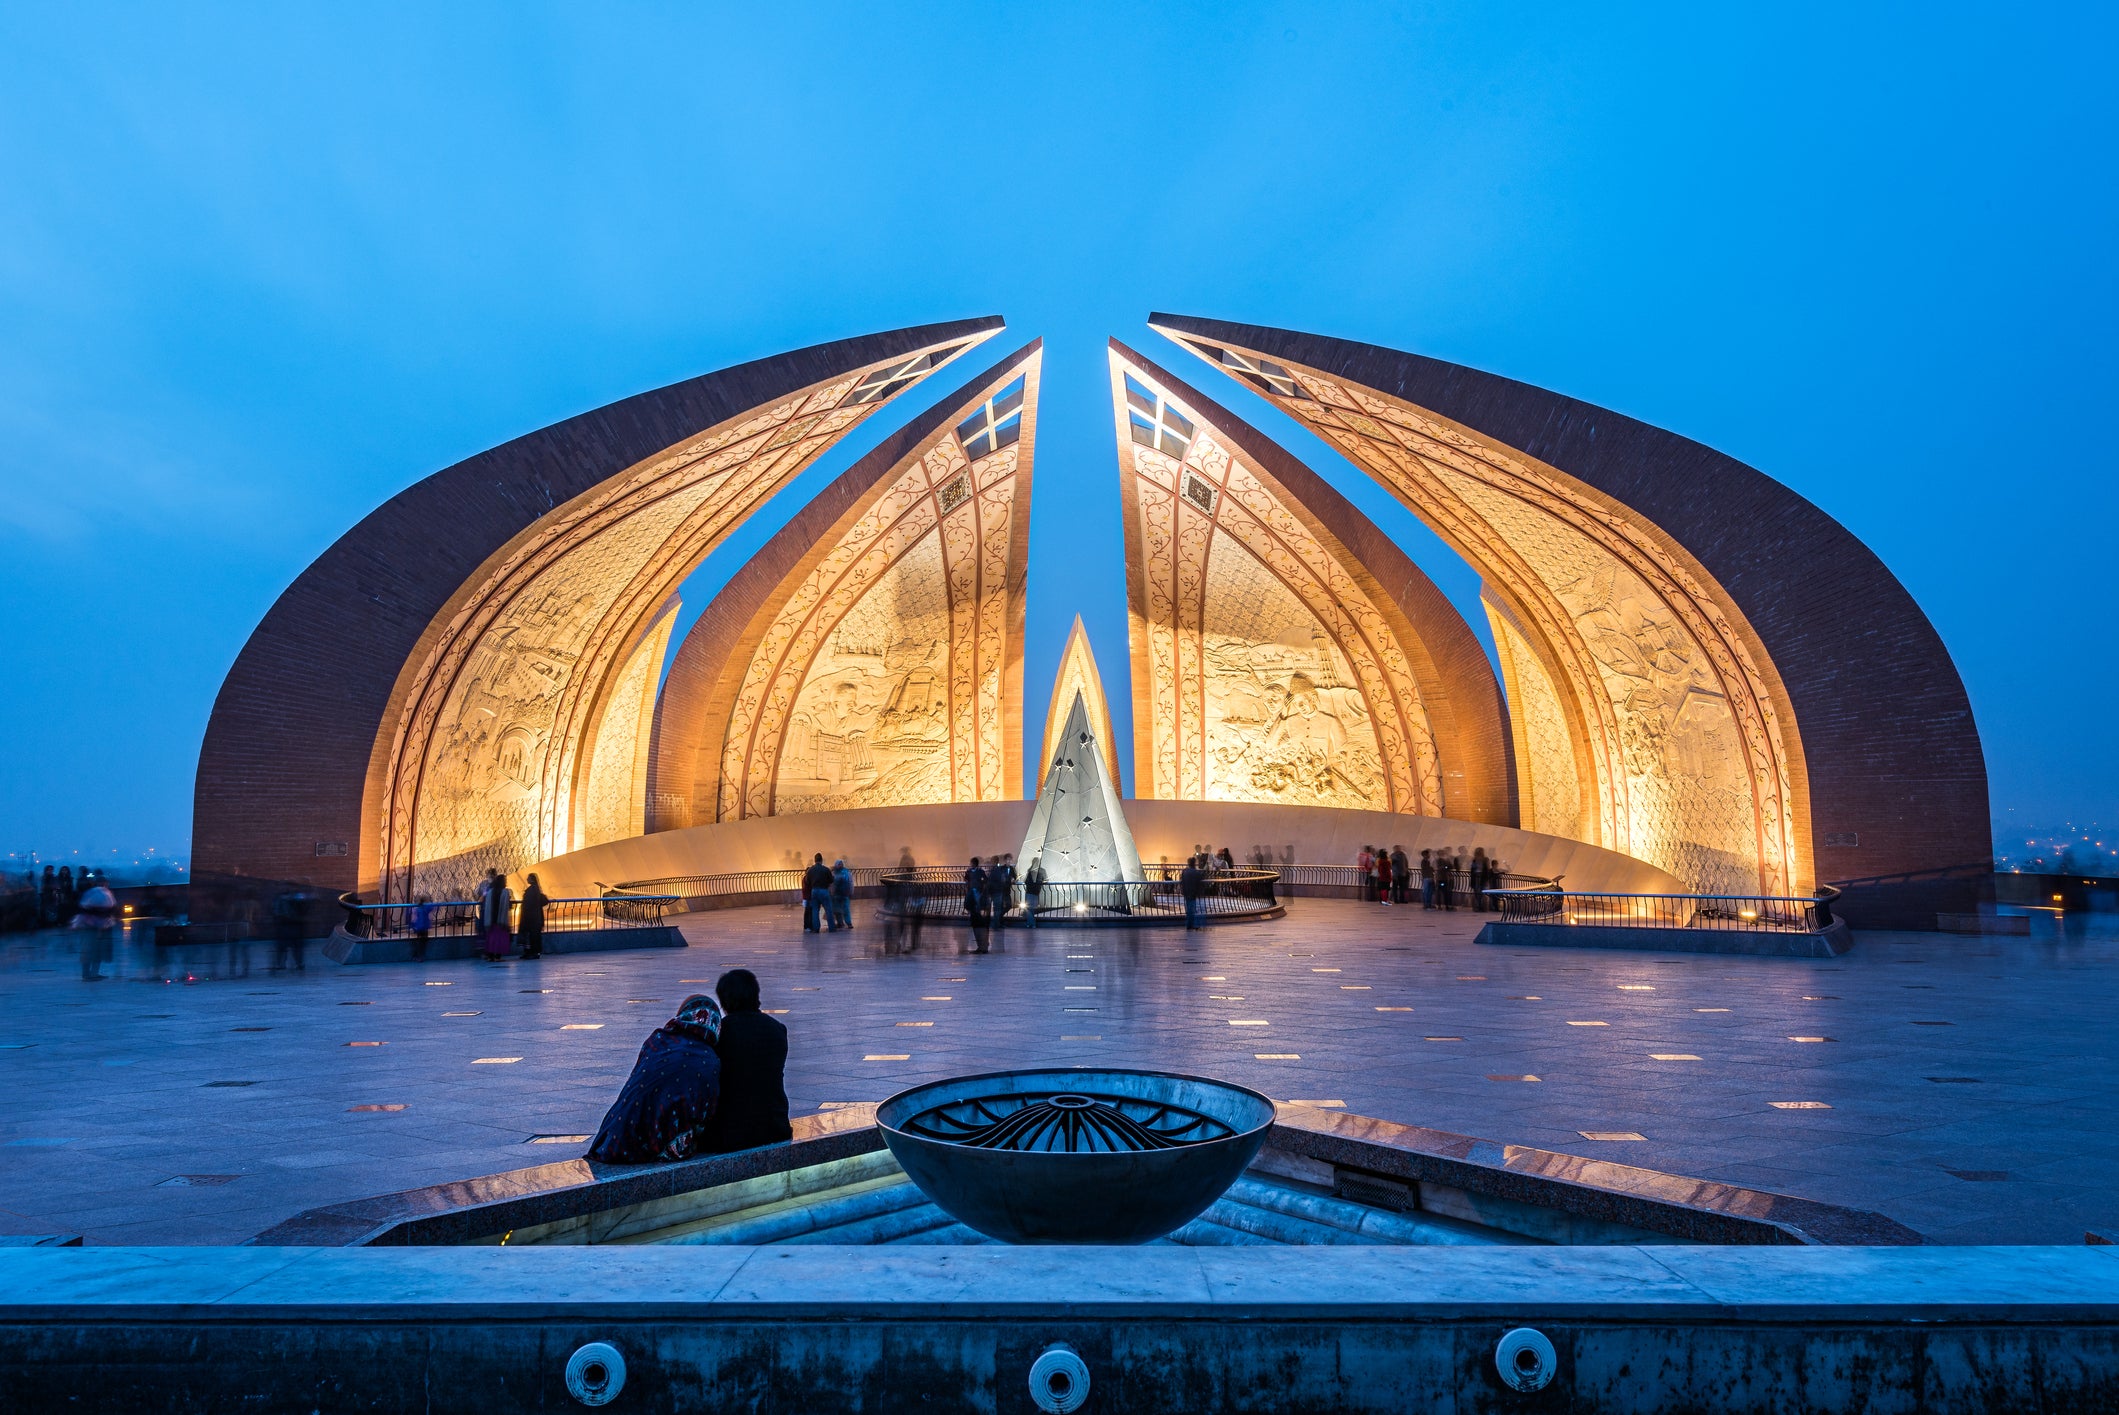 The Pakistan monument in Islamabad represents the four provinces of the country